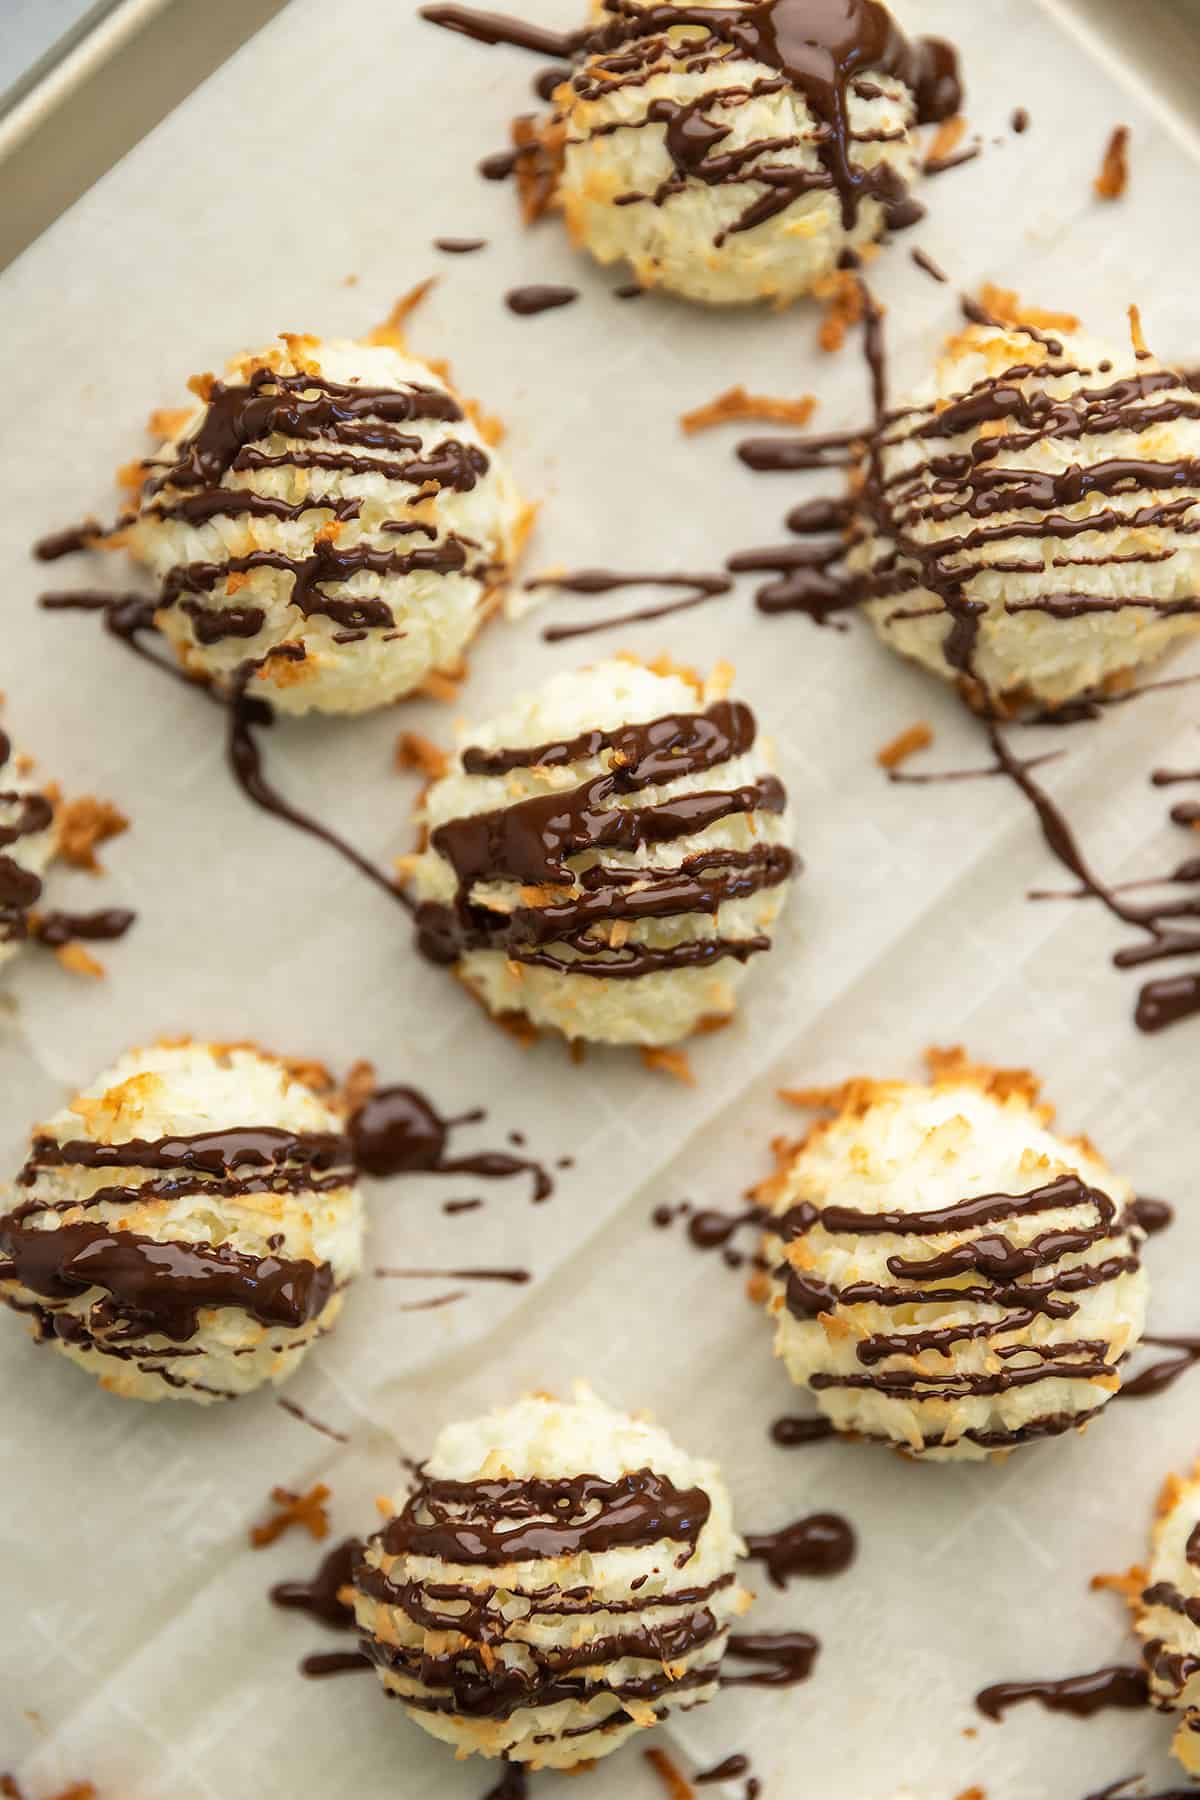 coconut macaroons drizzled with chocolate on a sheet tray